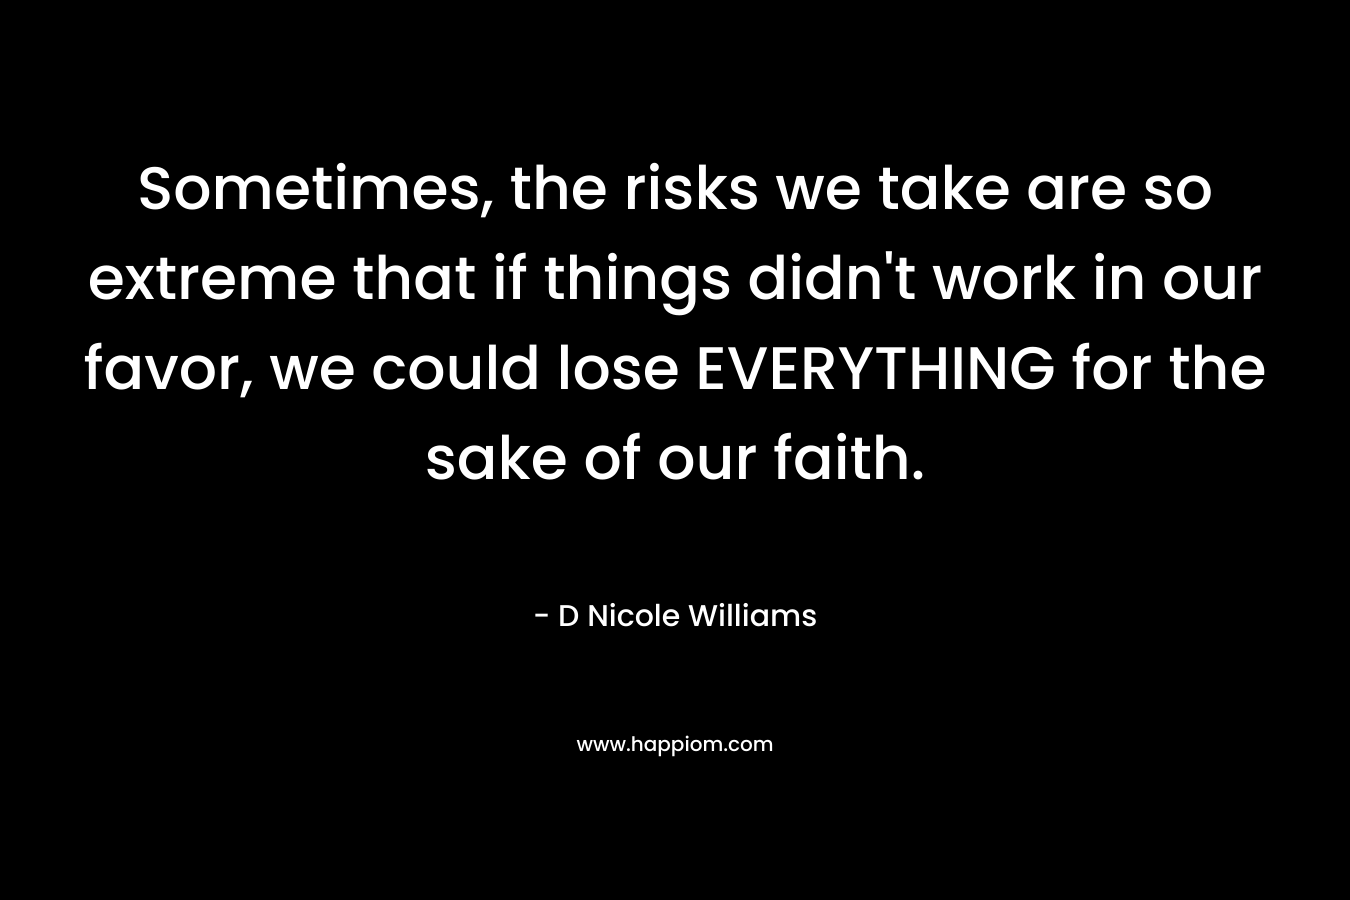 Sometimes, the risks we take are so extreme that if things didn’t work in our favor, we could lose EVERYTHING for the sake of our faith. – D Nicole Williams